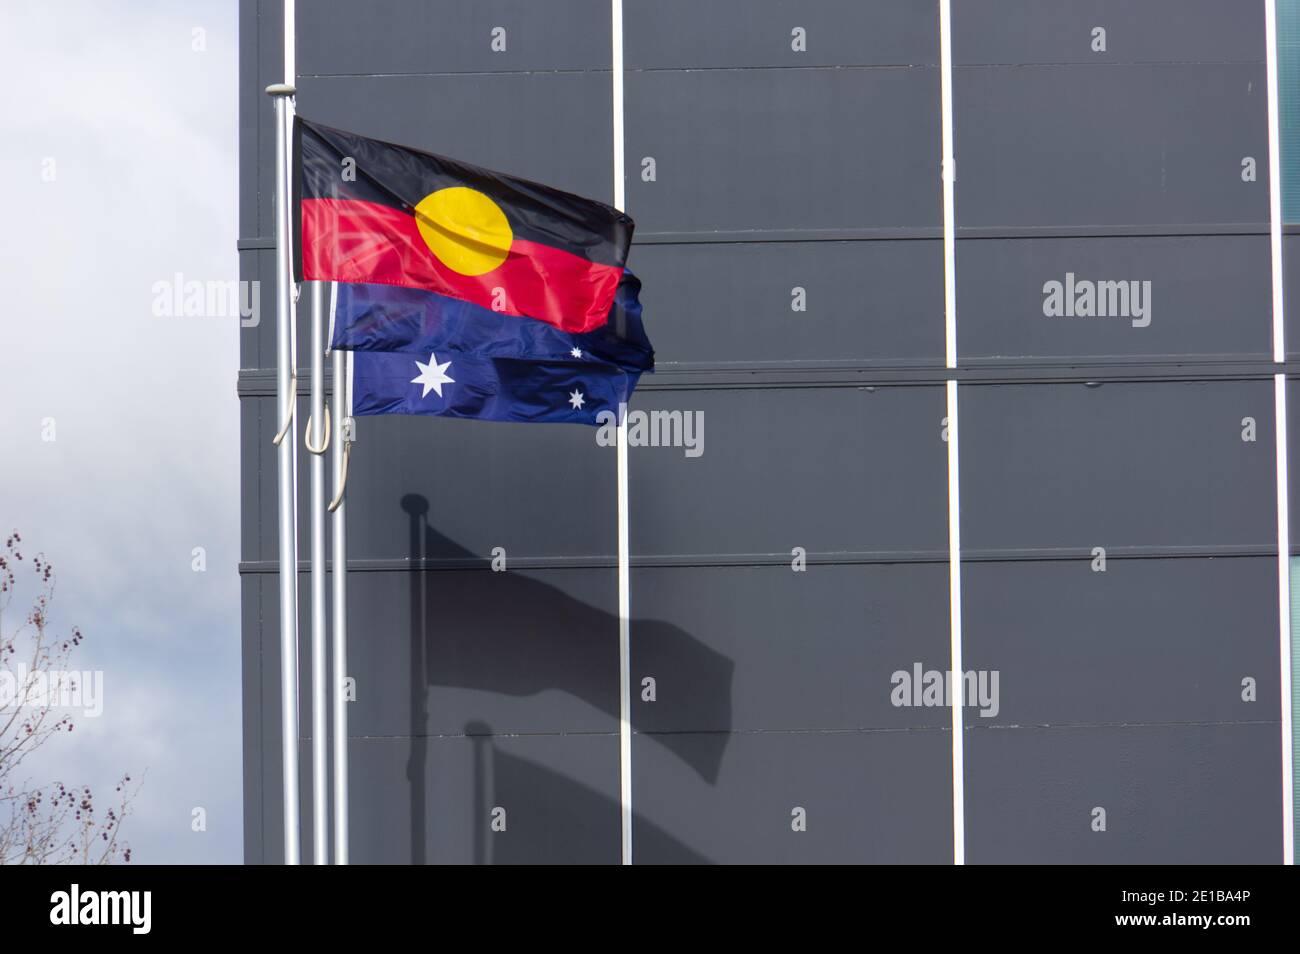 Indigenous flag and Australian flag unfurled in wind next to a building in Victoria, Australia. Stock Photo